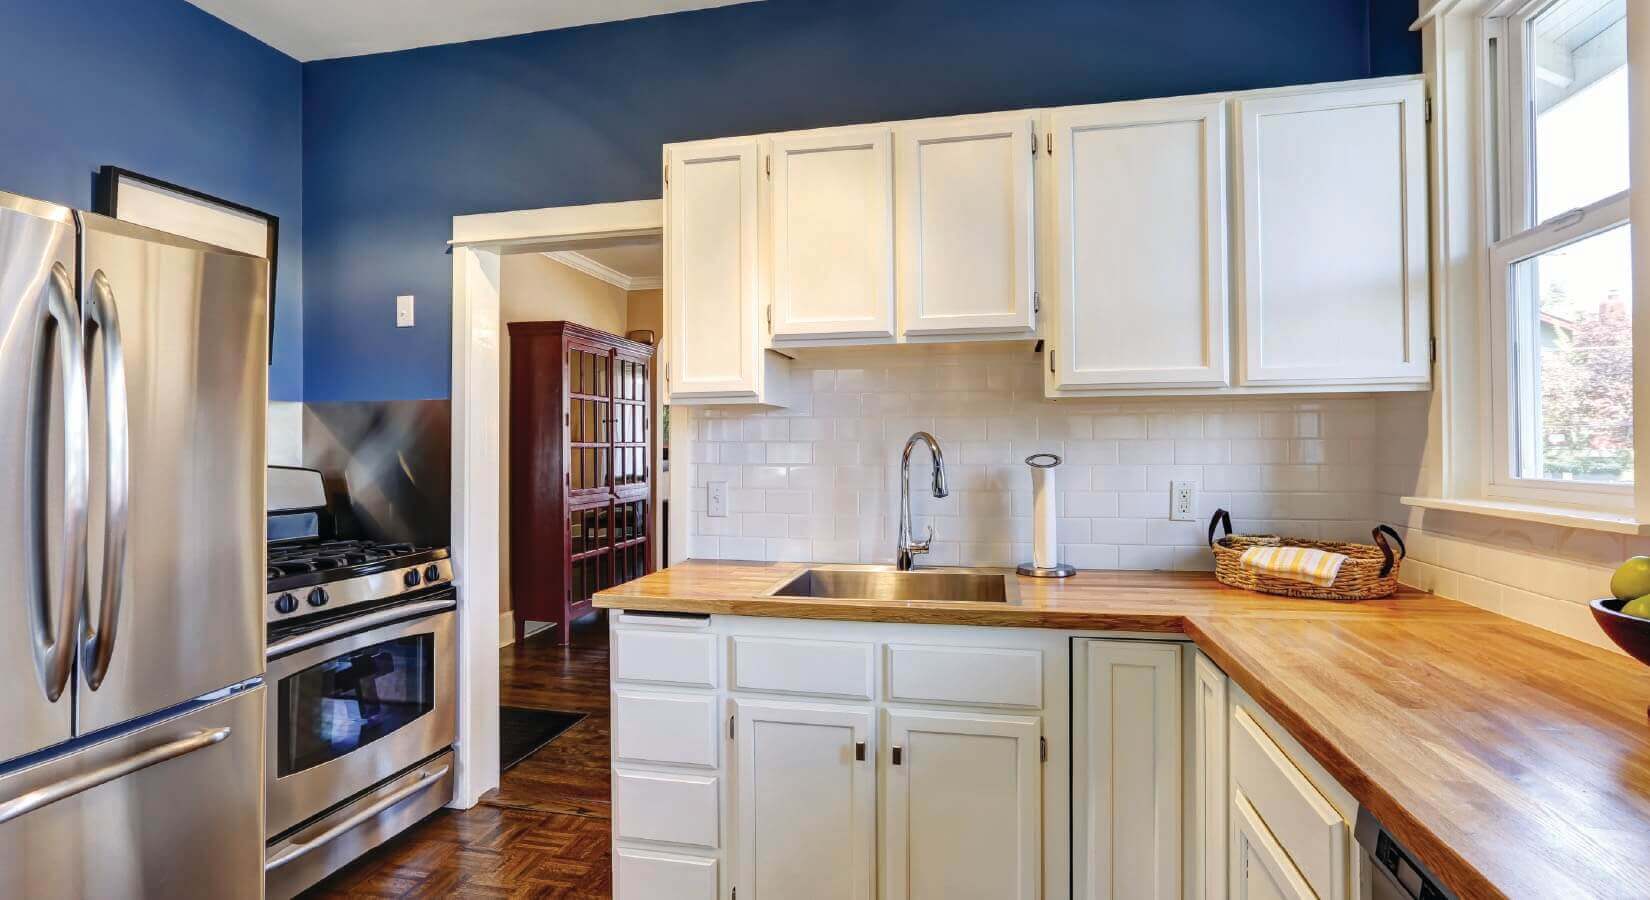 Kitchen with white cabinets and backsplash, butcher block countertops, and navy blue walls.